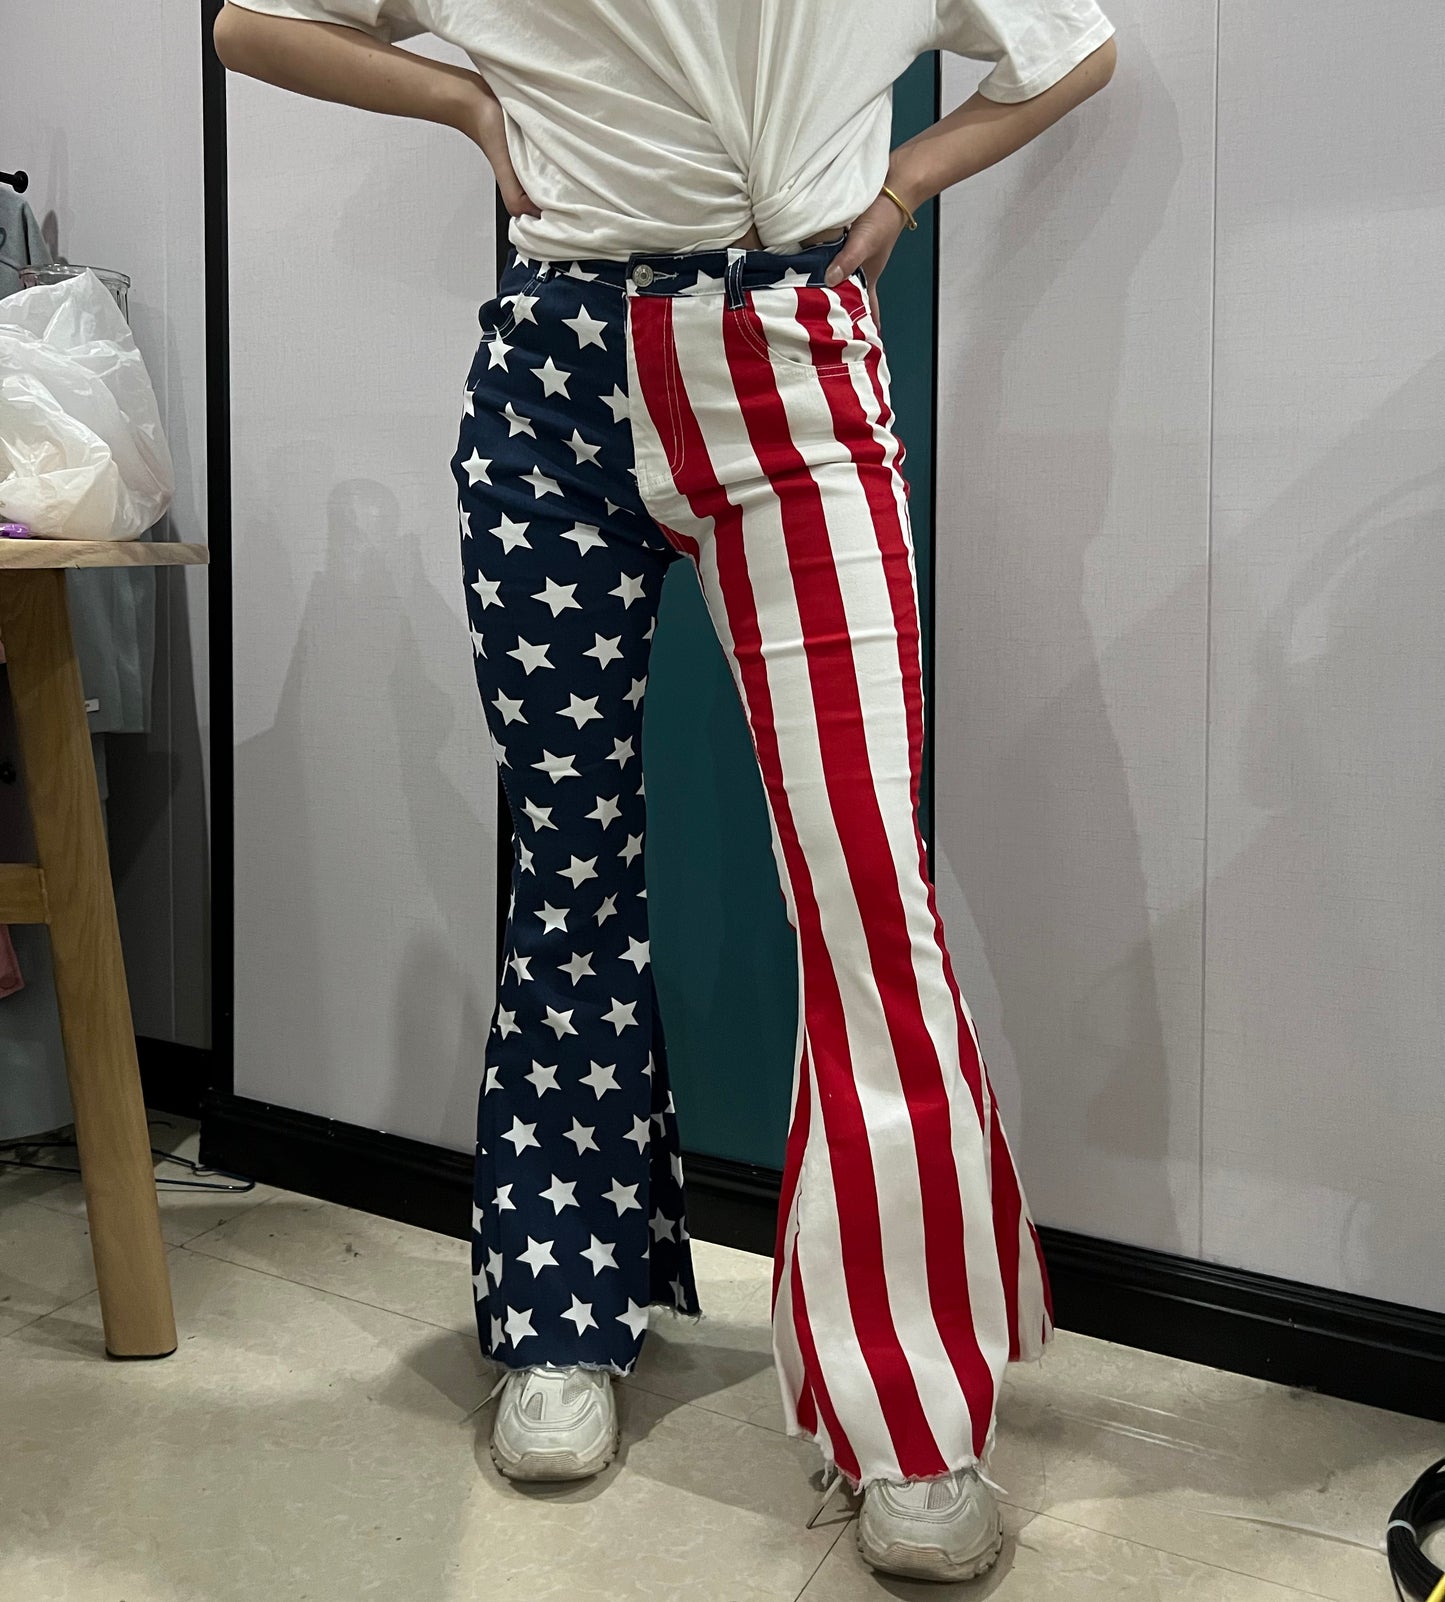 P0119 Adult star & stripes denim 4th of July bell bottom jeans